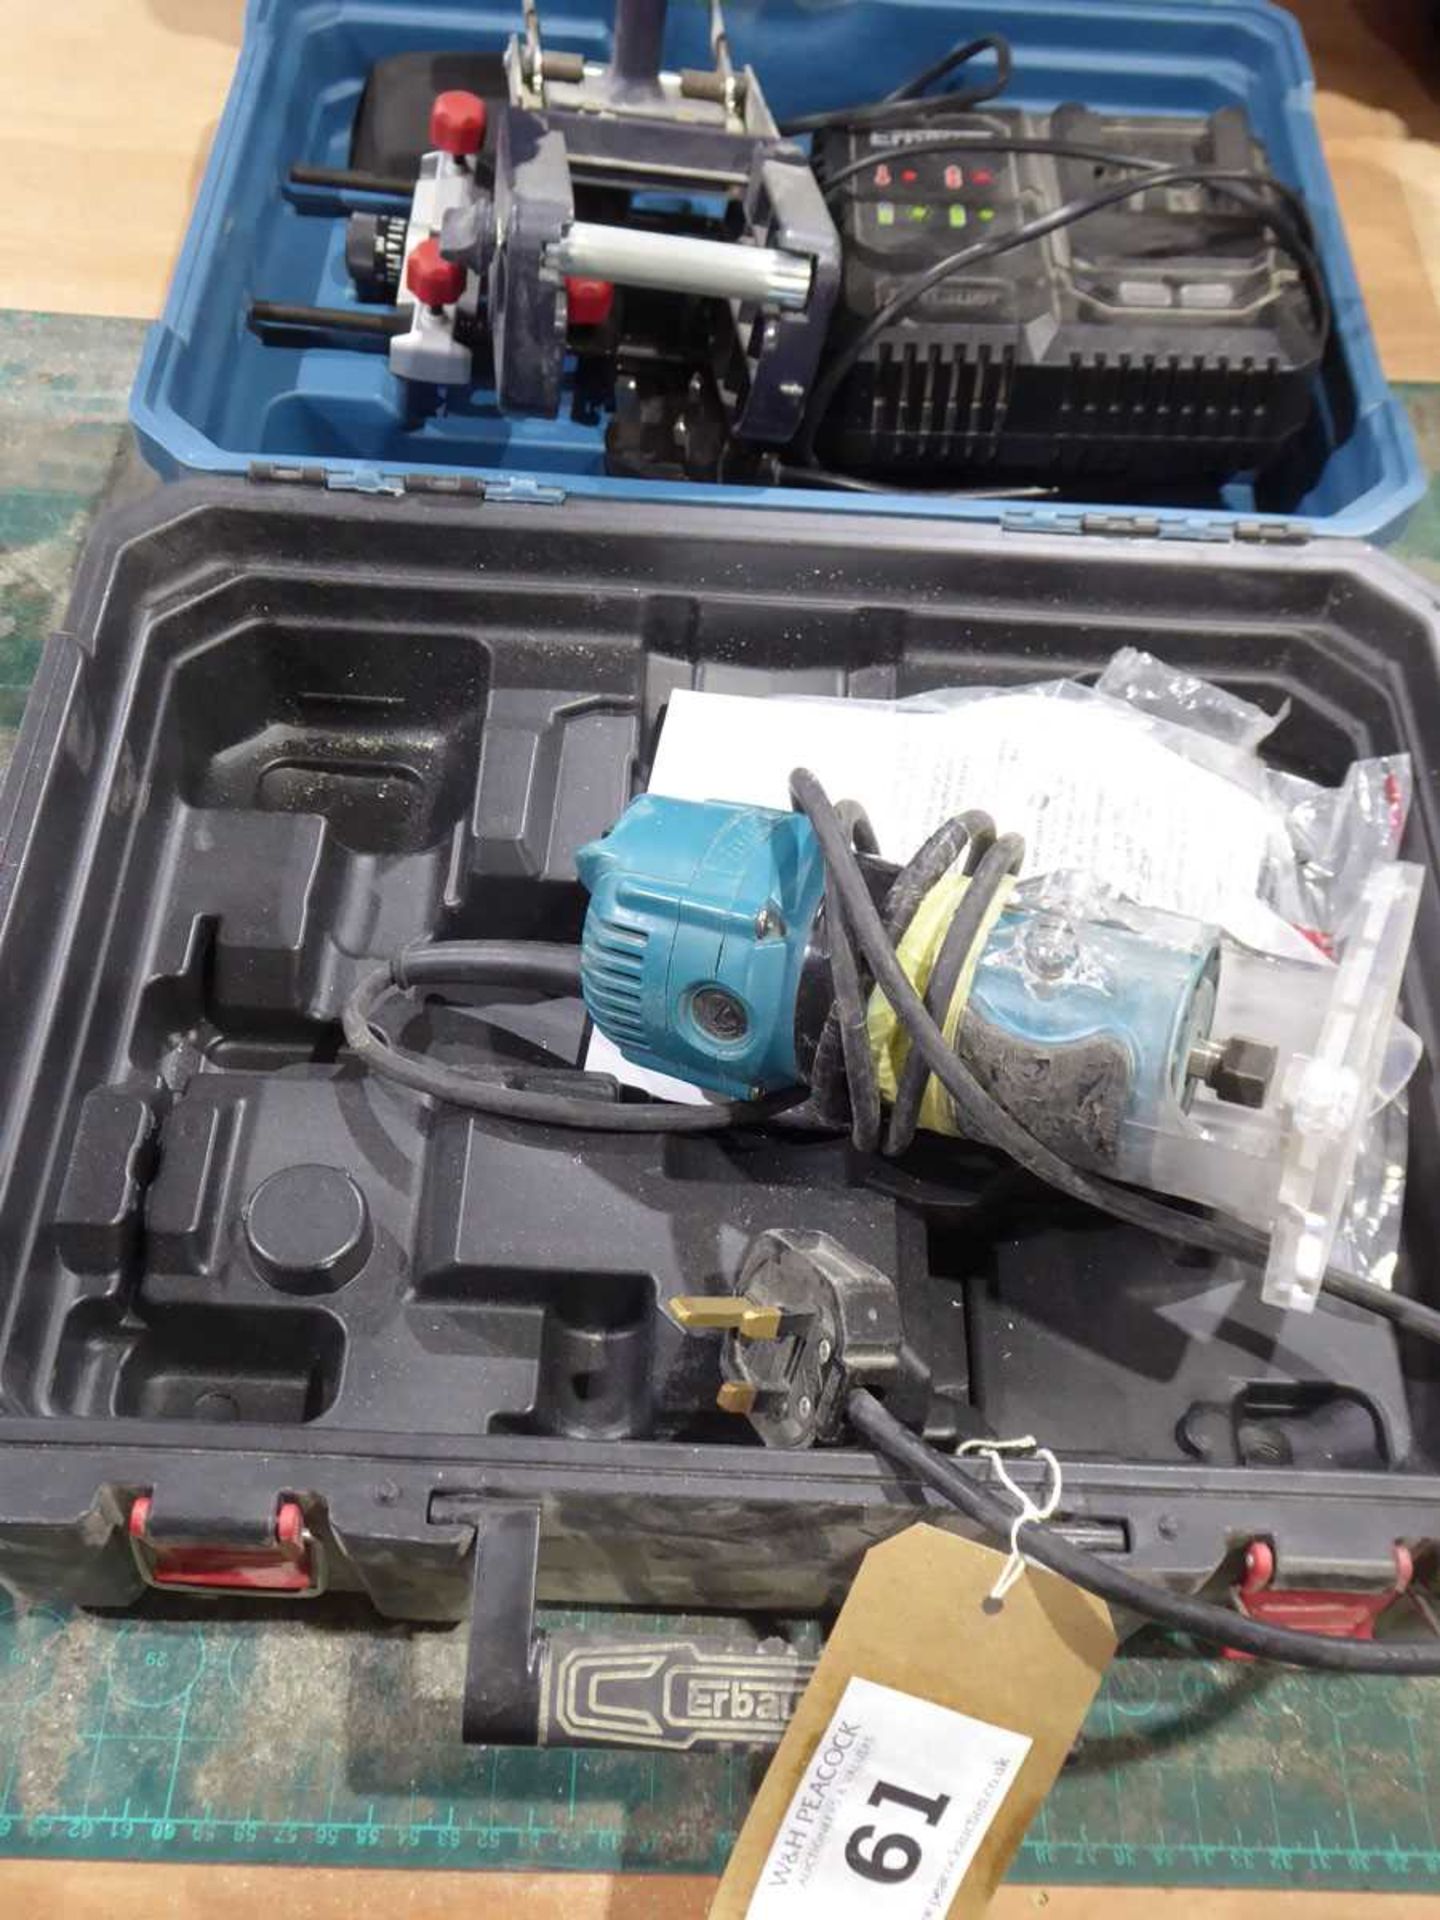 +VAT Makita single phase electric trimmer together with various Erbauer router parts